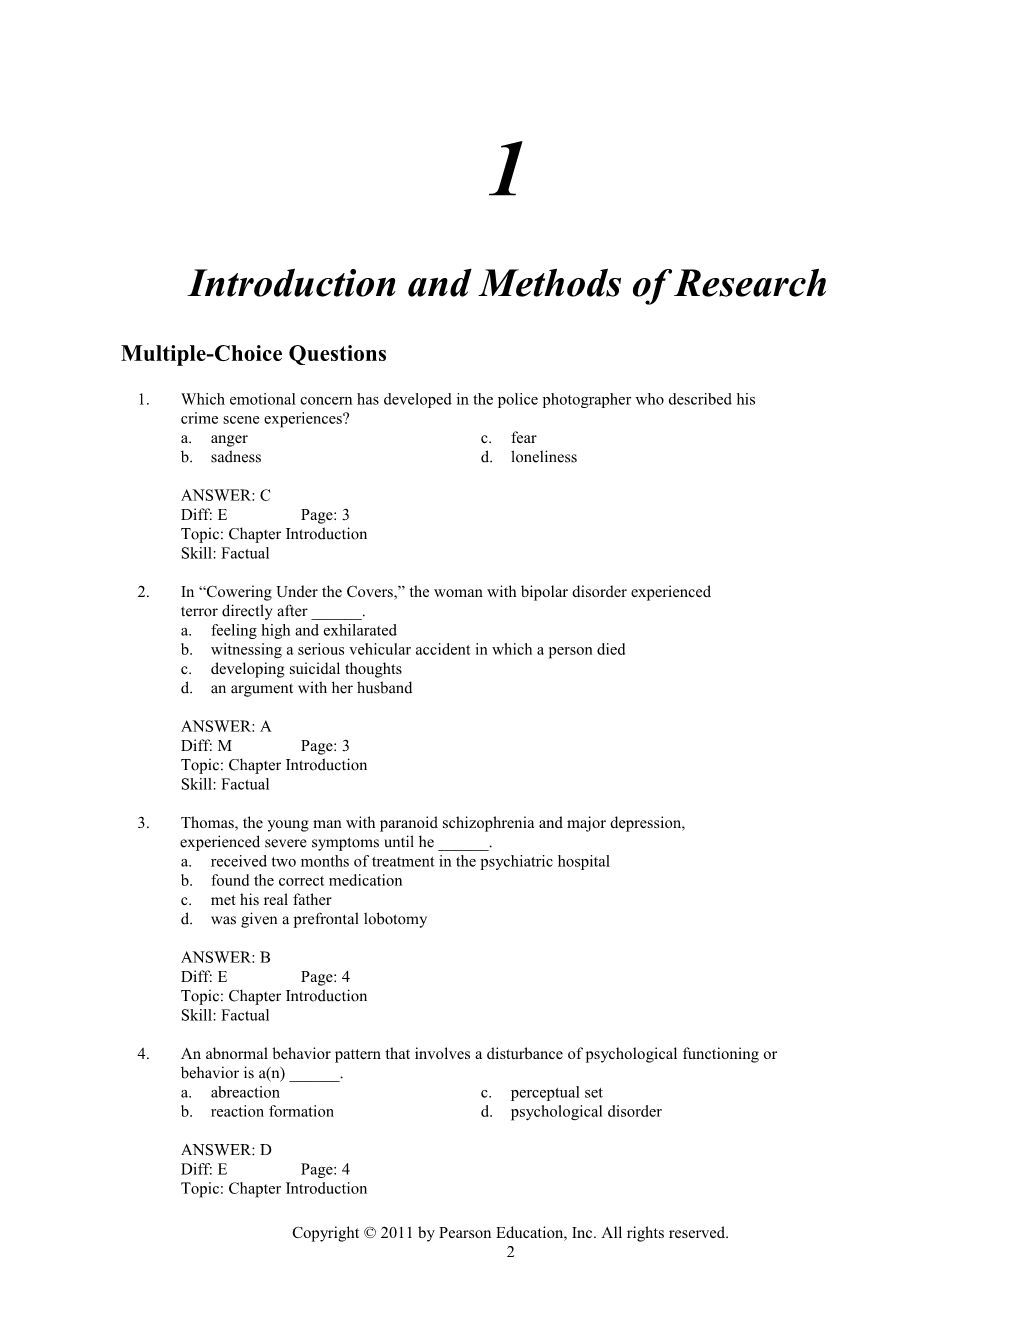 Introduction and Methods of Research